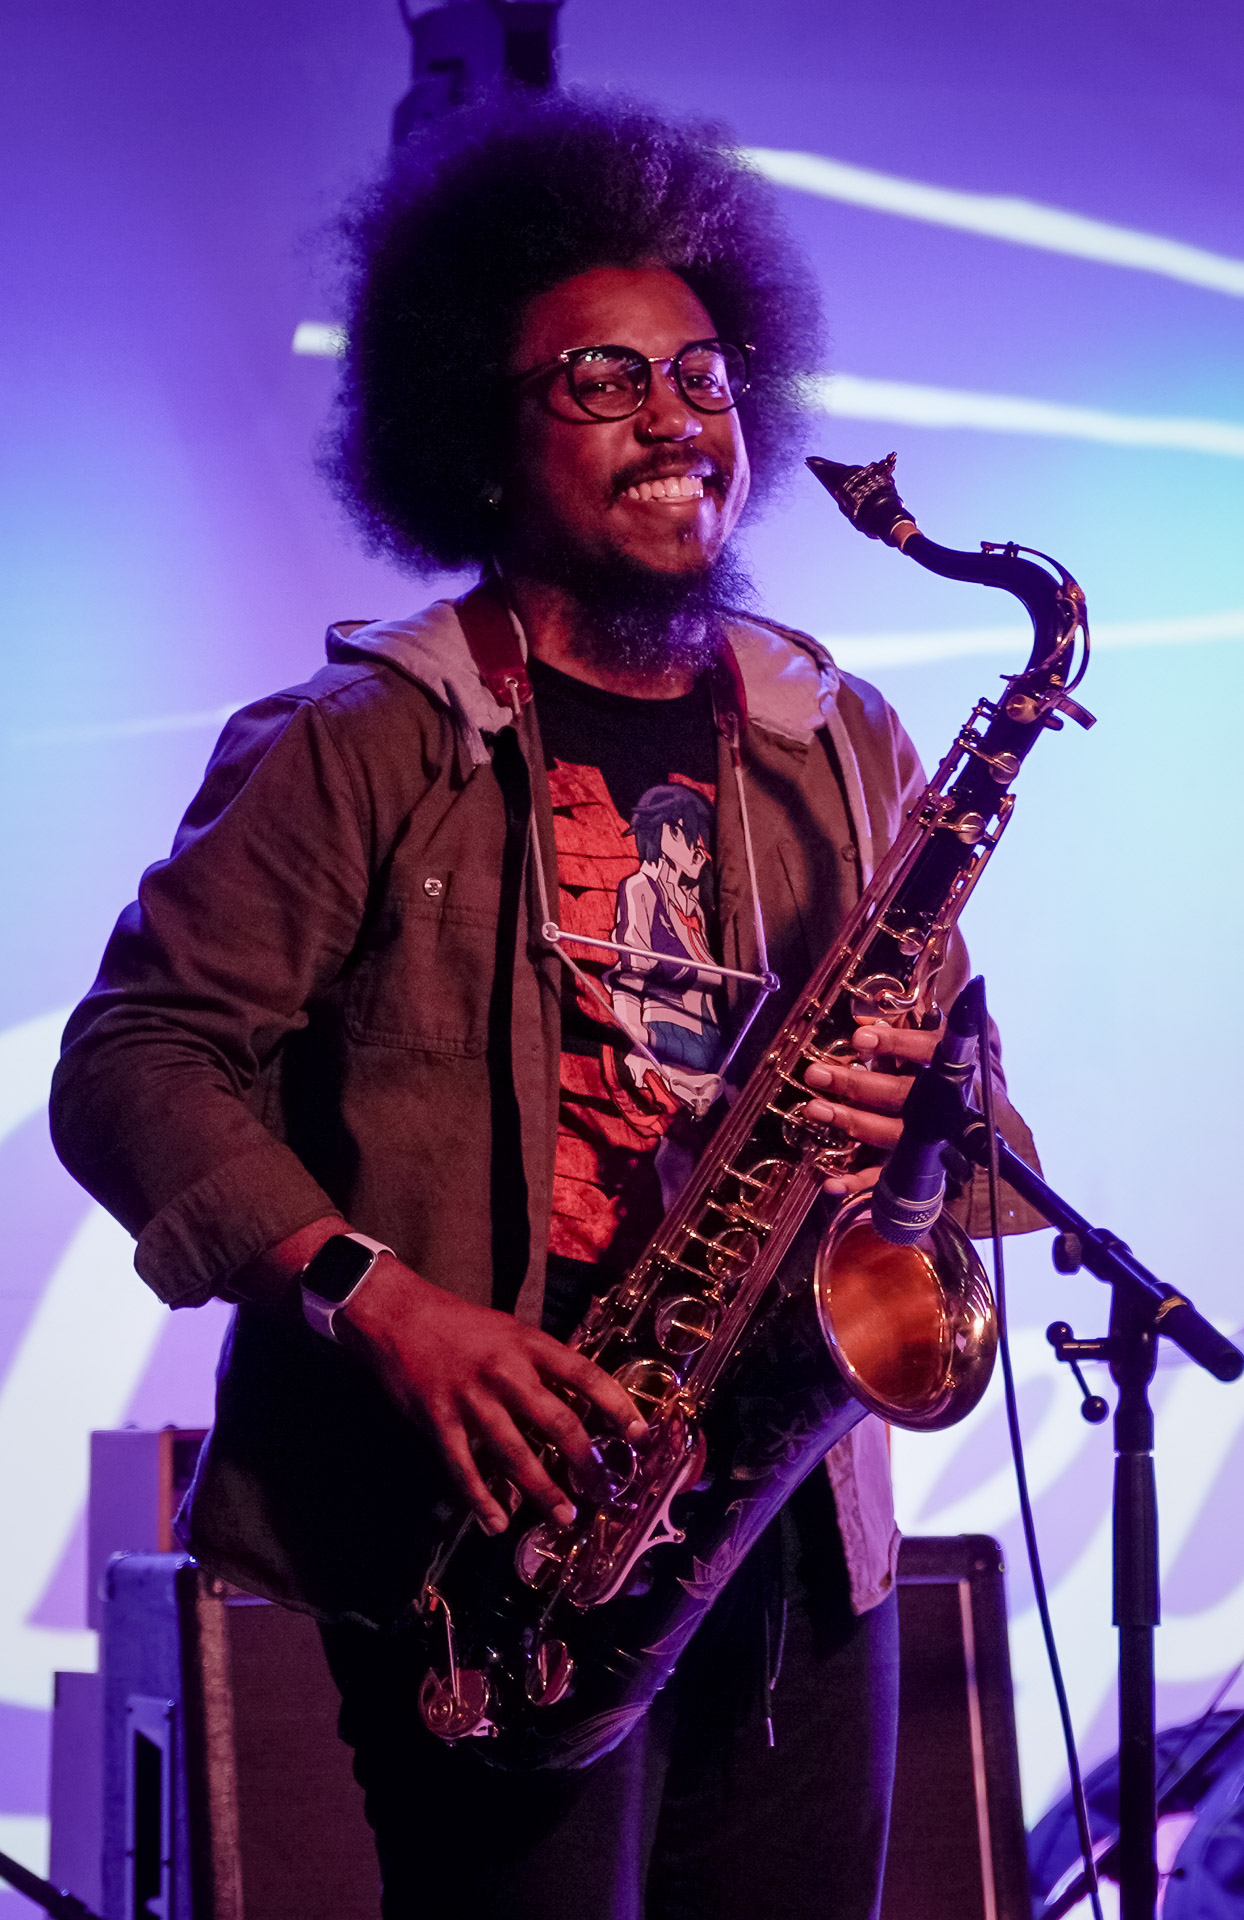 A musician on stage holding a saxophone and smiling 